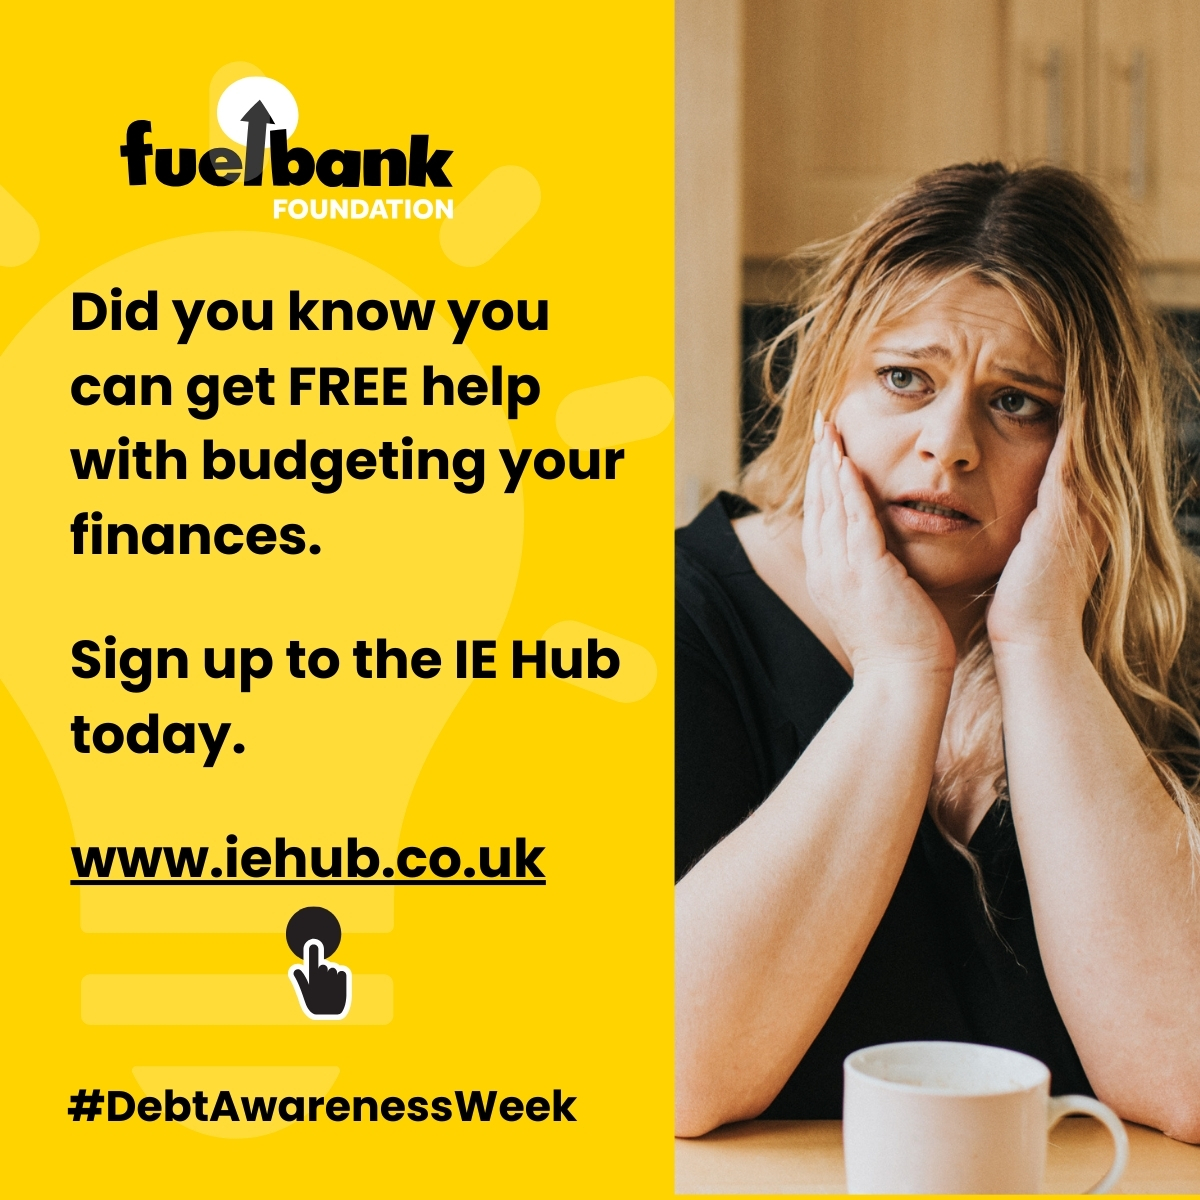 Make getting out of debt easier and less stressful. If making your budget seems too complicated or you don't have time, sign up to the IE Hub budgeting tool for free, and let it do the hard work for you. Sign up at iehub.co.uk #DebtAwarenessWeek